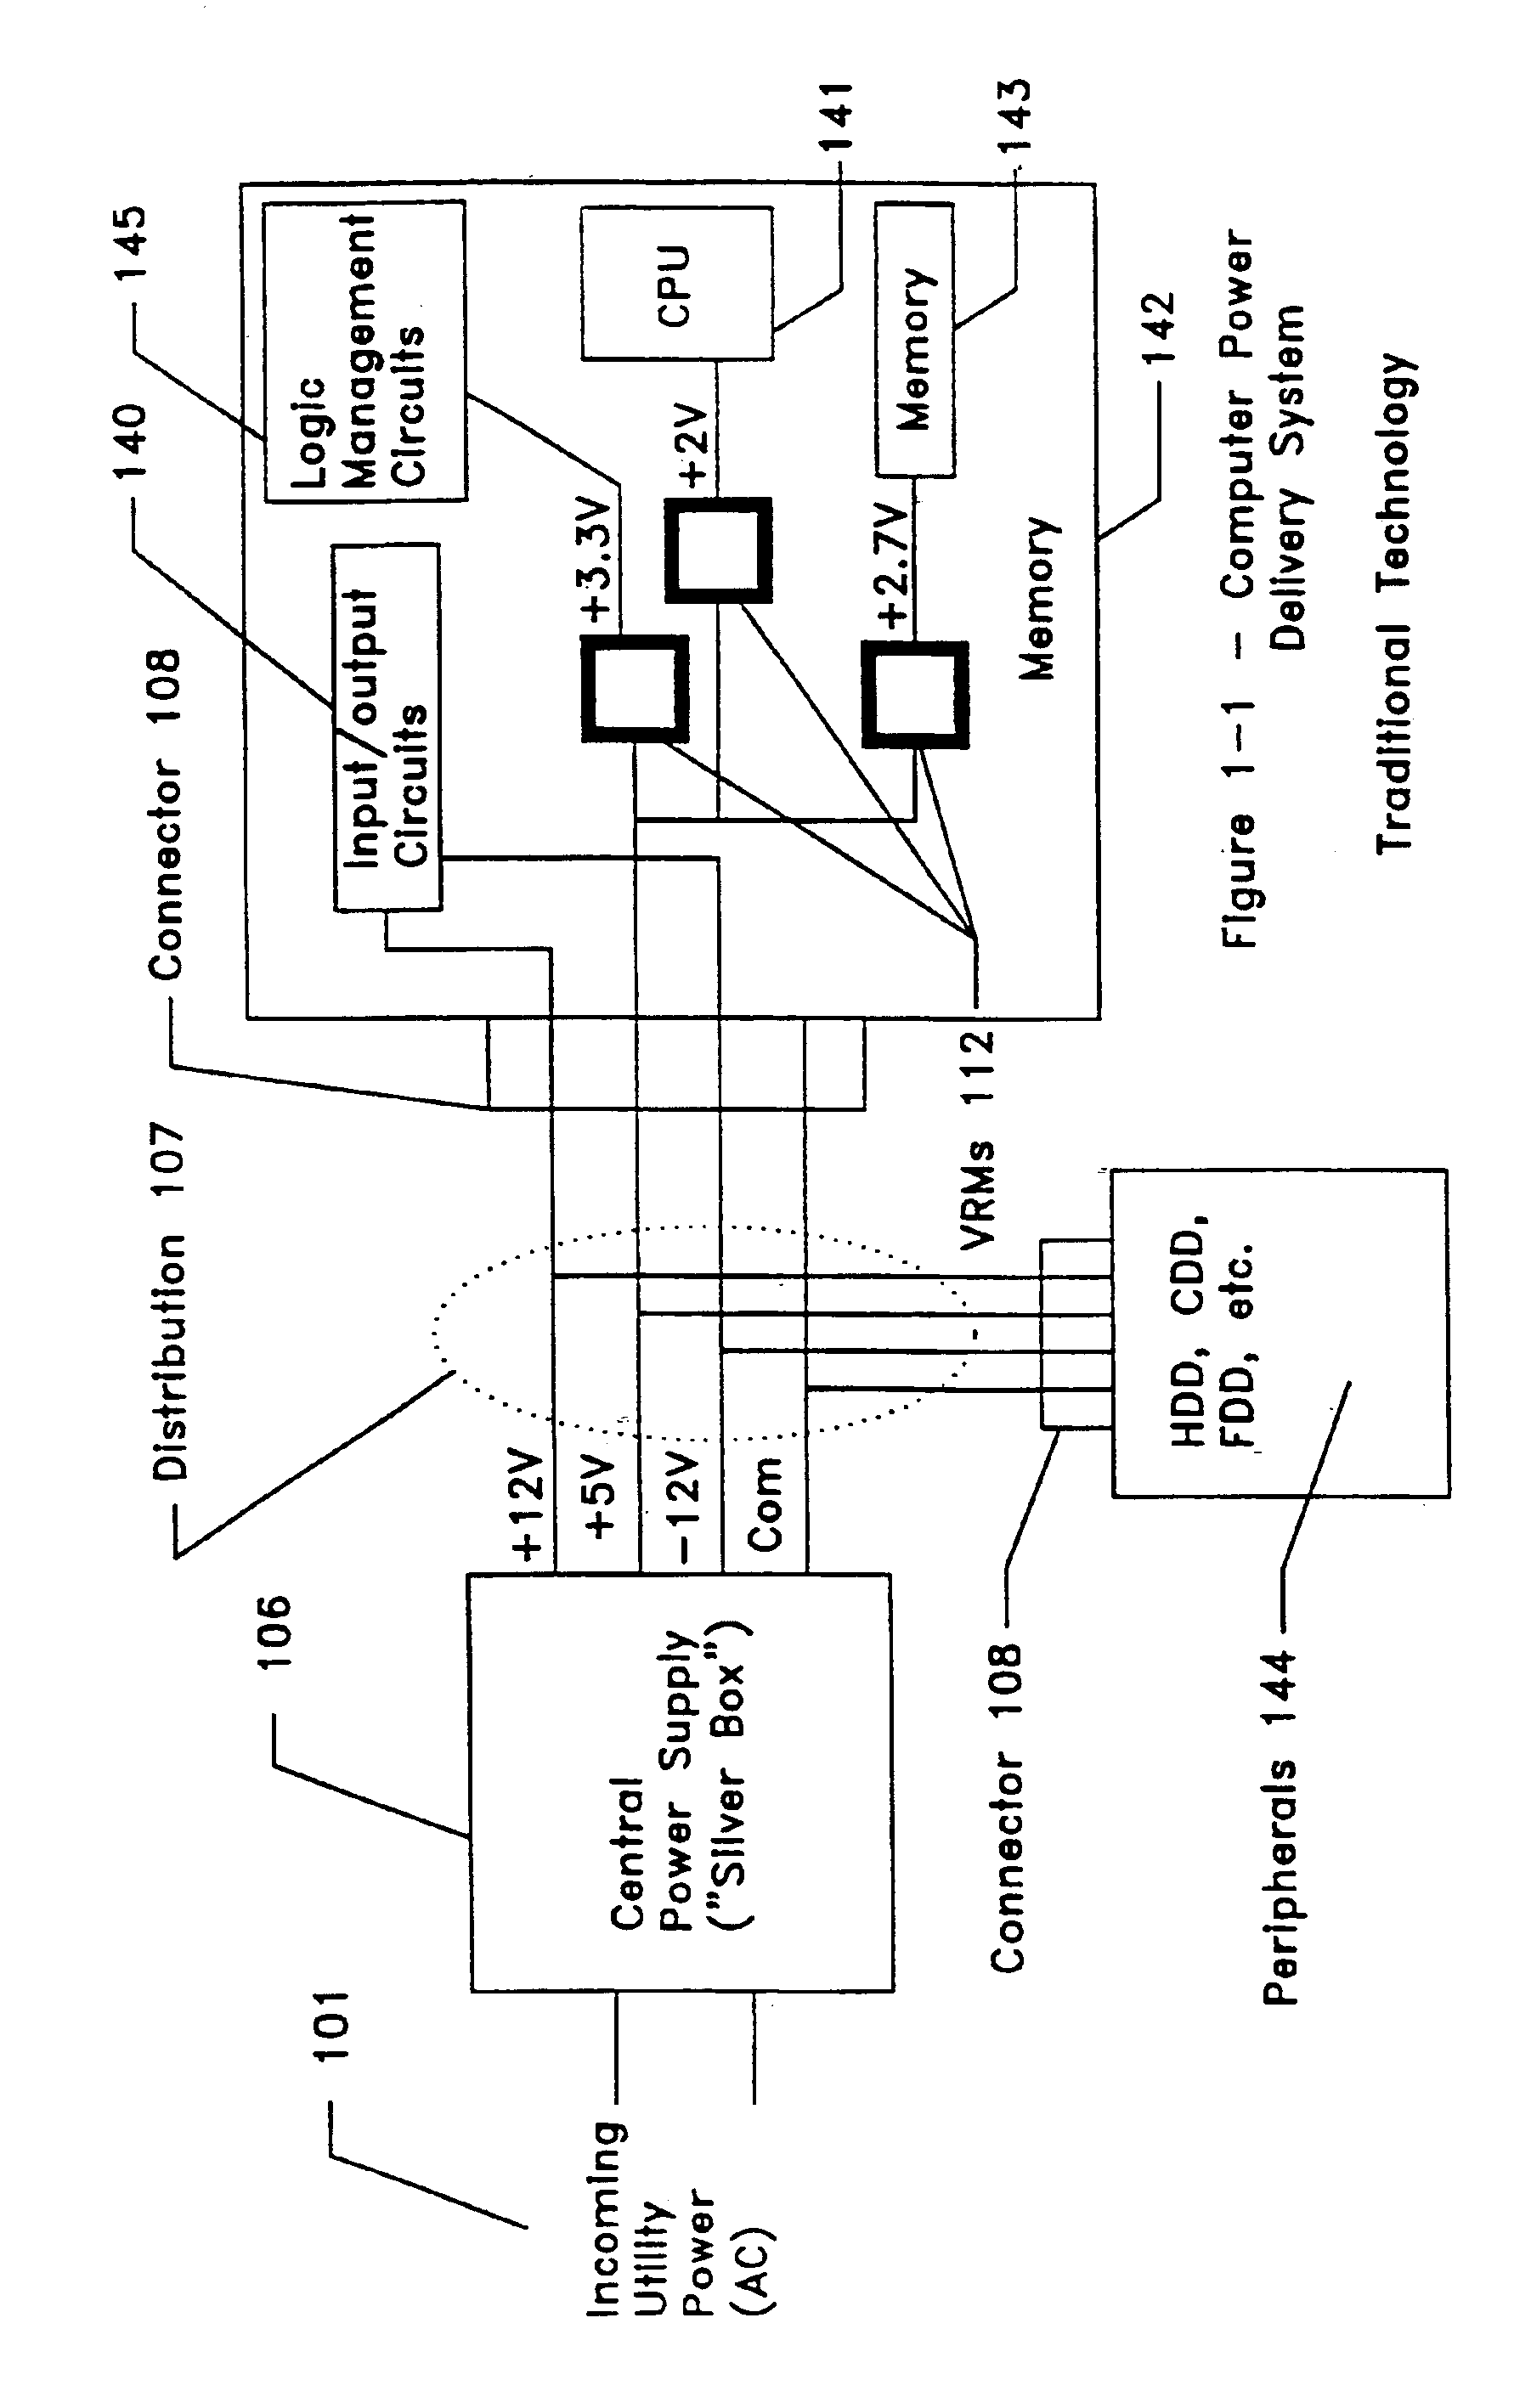 Waveform independent high frequency power system